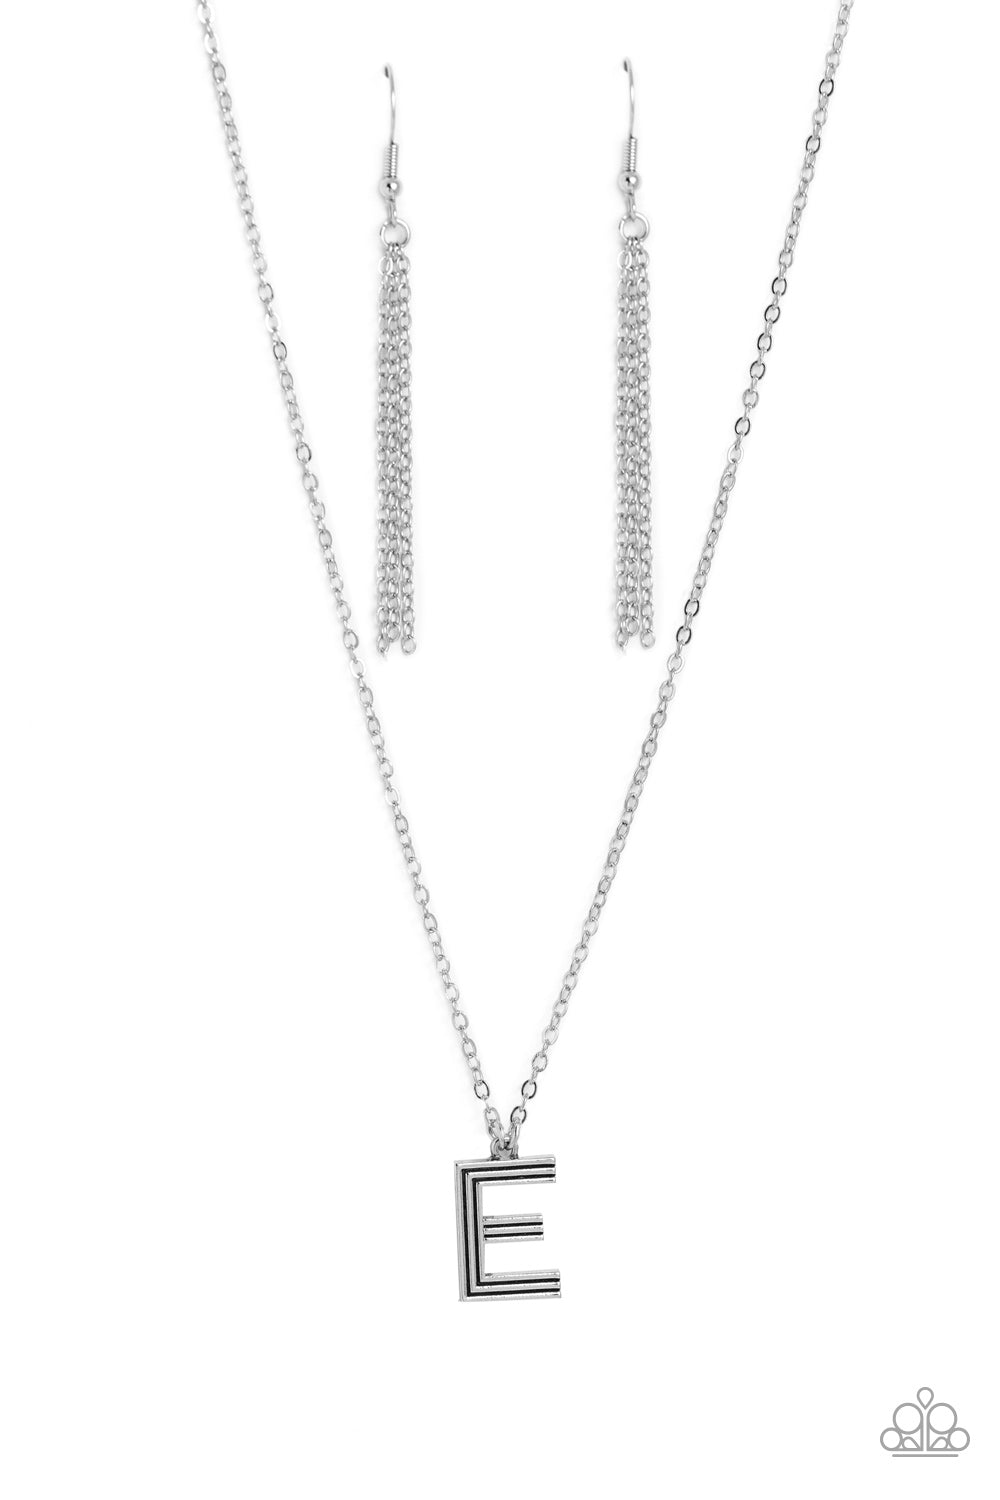 Leave Your Initials Silver - E Necklace - Paparazzi Accessories